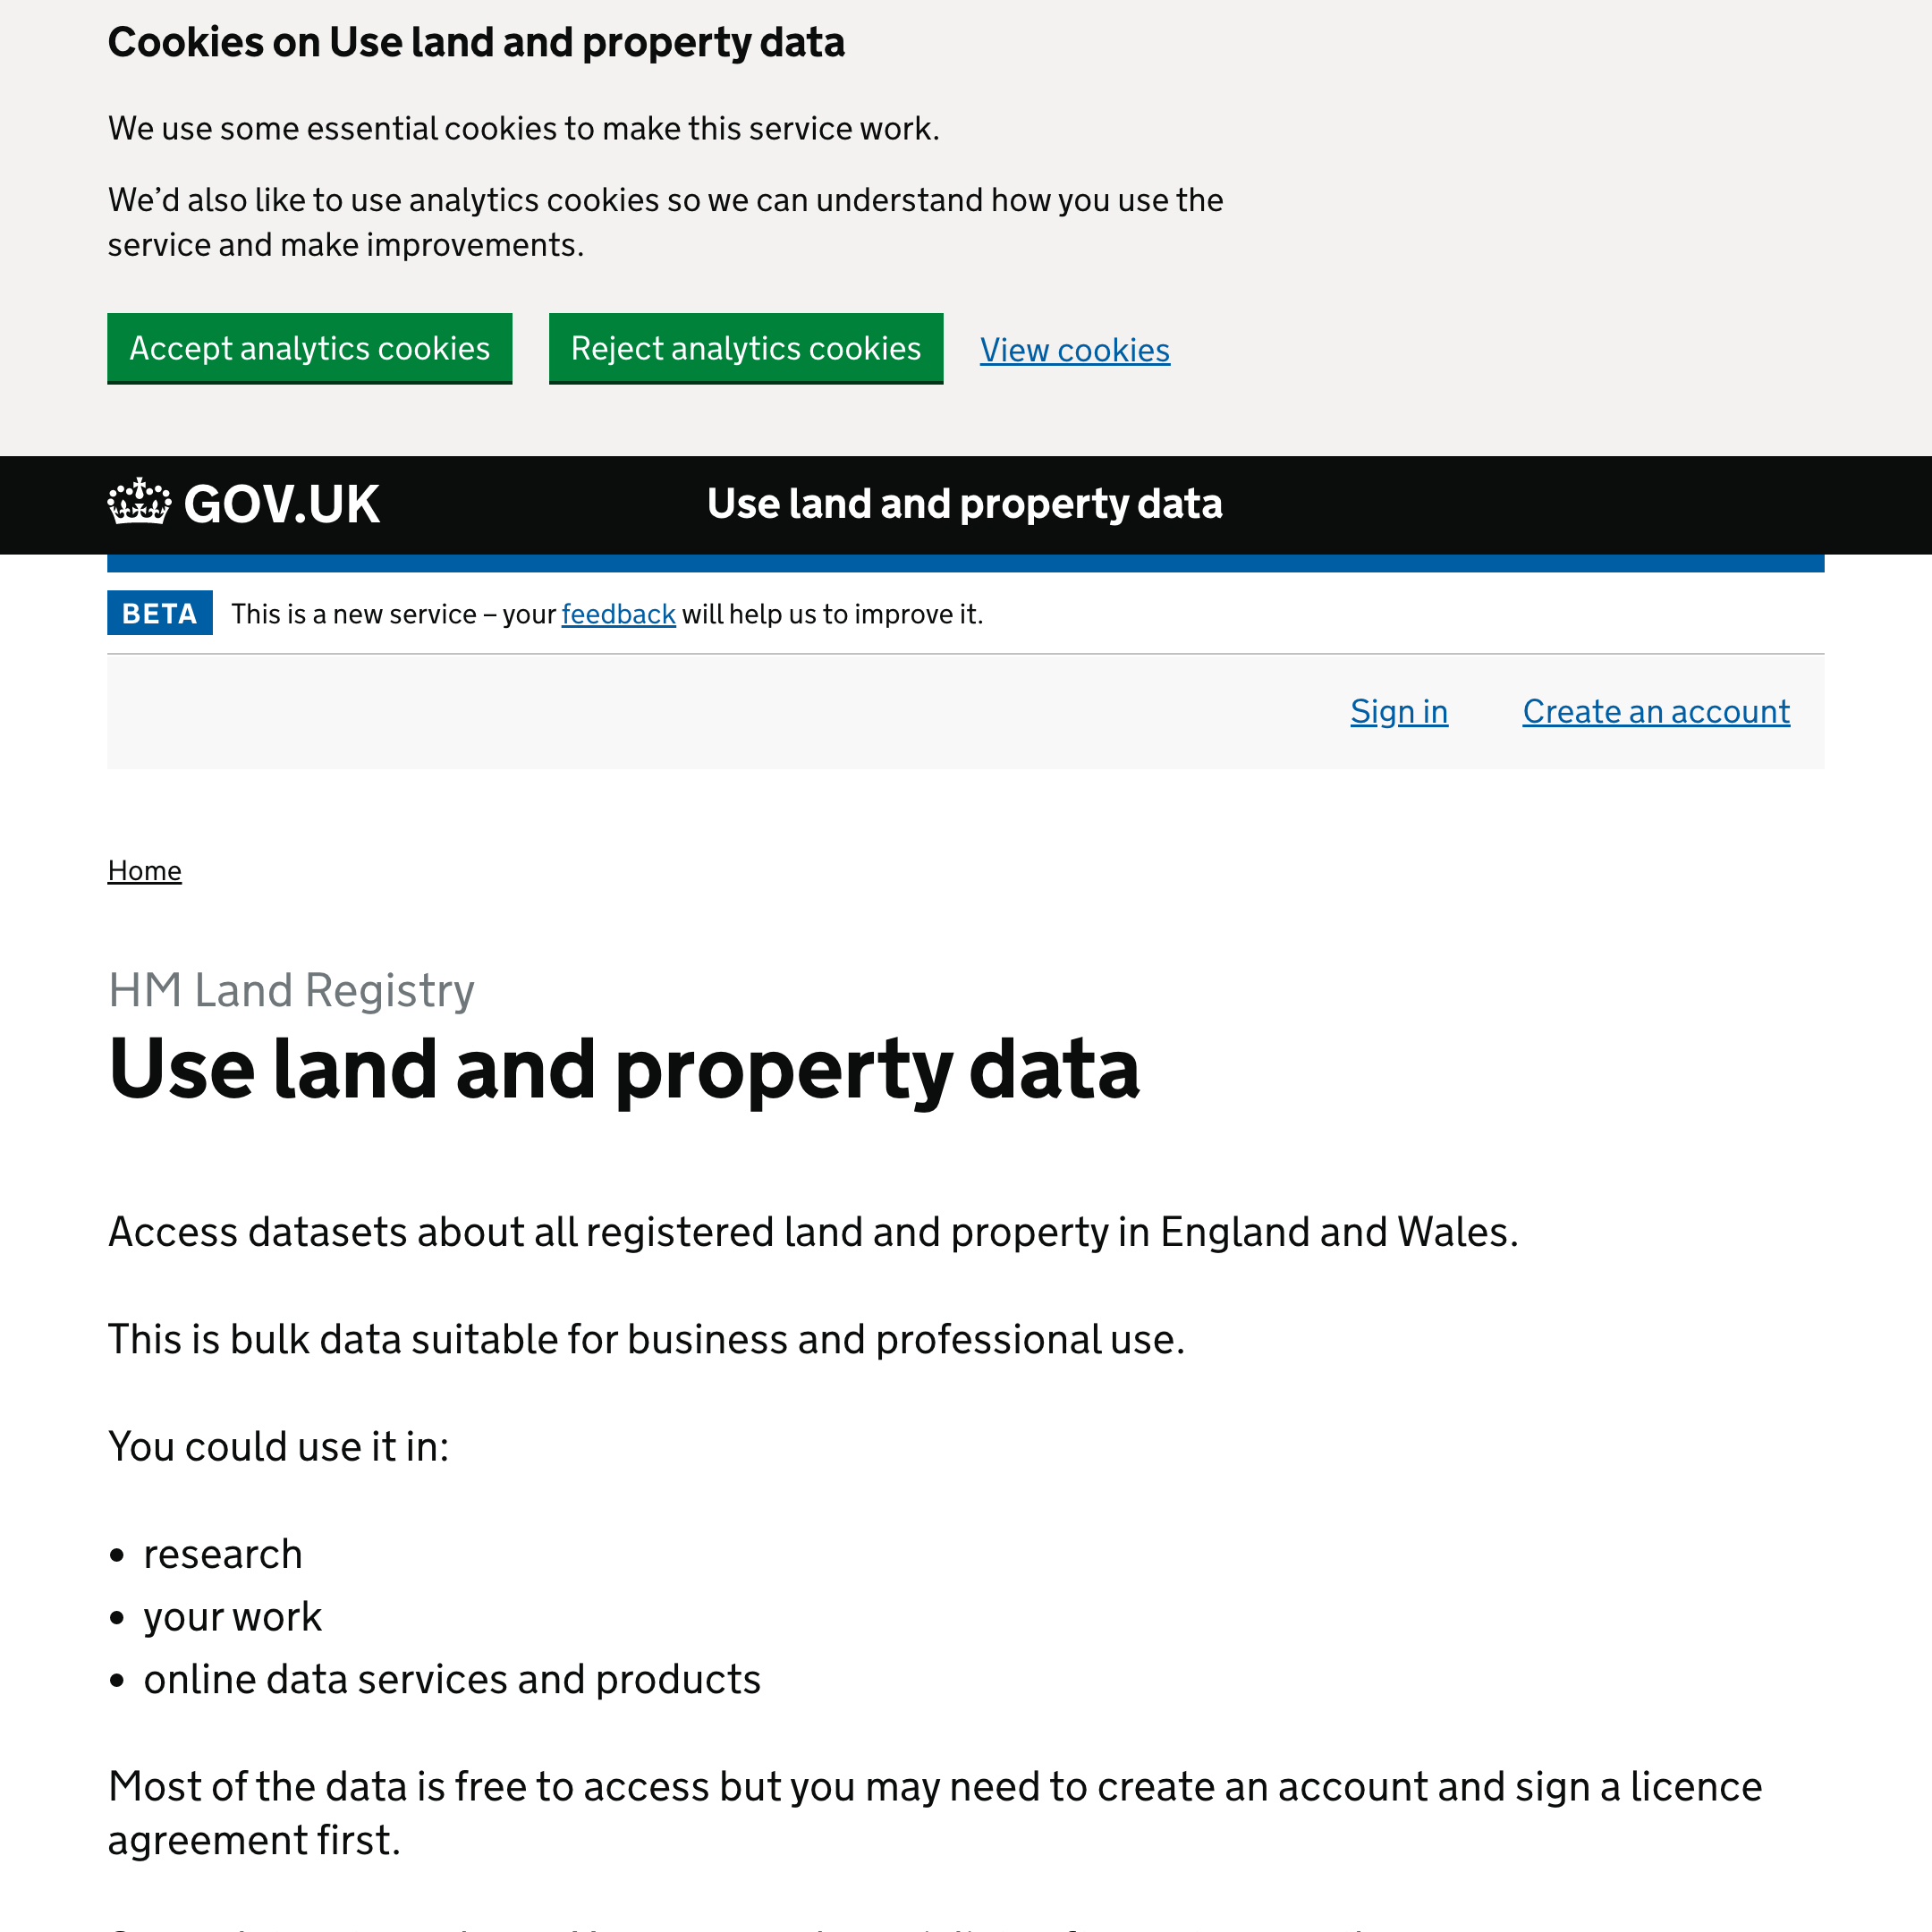 Use land and property data